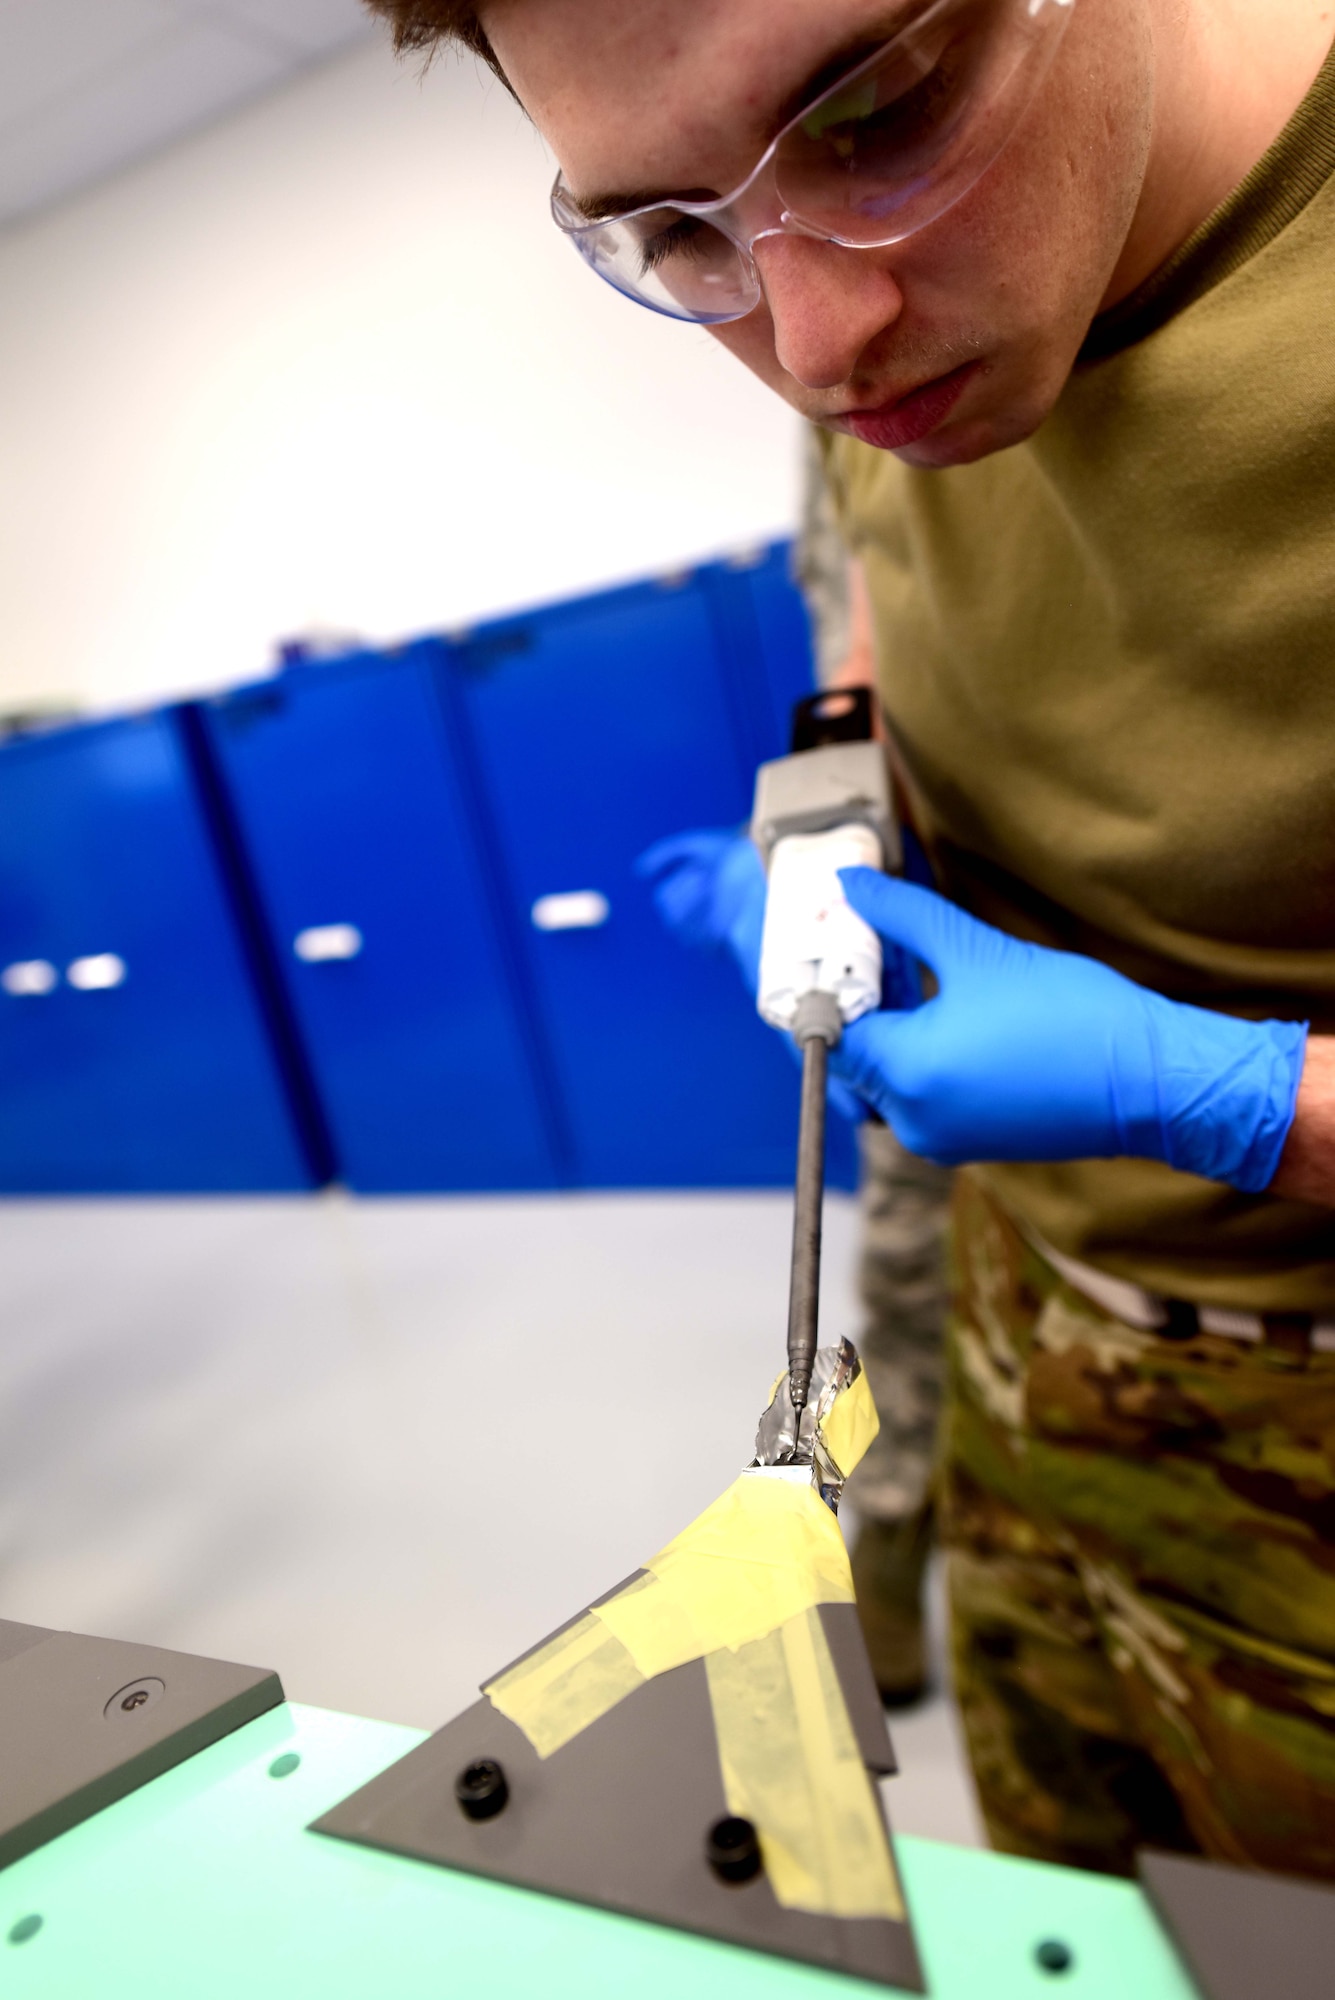 U.S. Air Force Airman Bradley Brajkovich, a 354th Maintenance Squadron F-35A Lightning II Low Observable Aircraft Structural Maintenance journeyman, conducts a paste repair on an F-35 test panel Jan. 23, 2020, at the field training detachment on Eielson Air Force Base, Alaska.